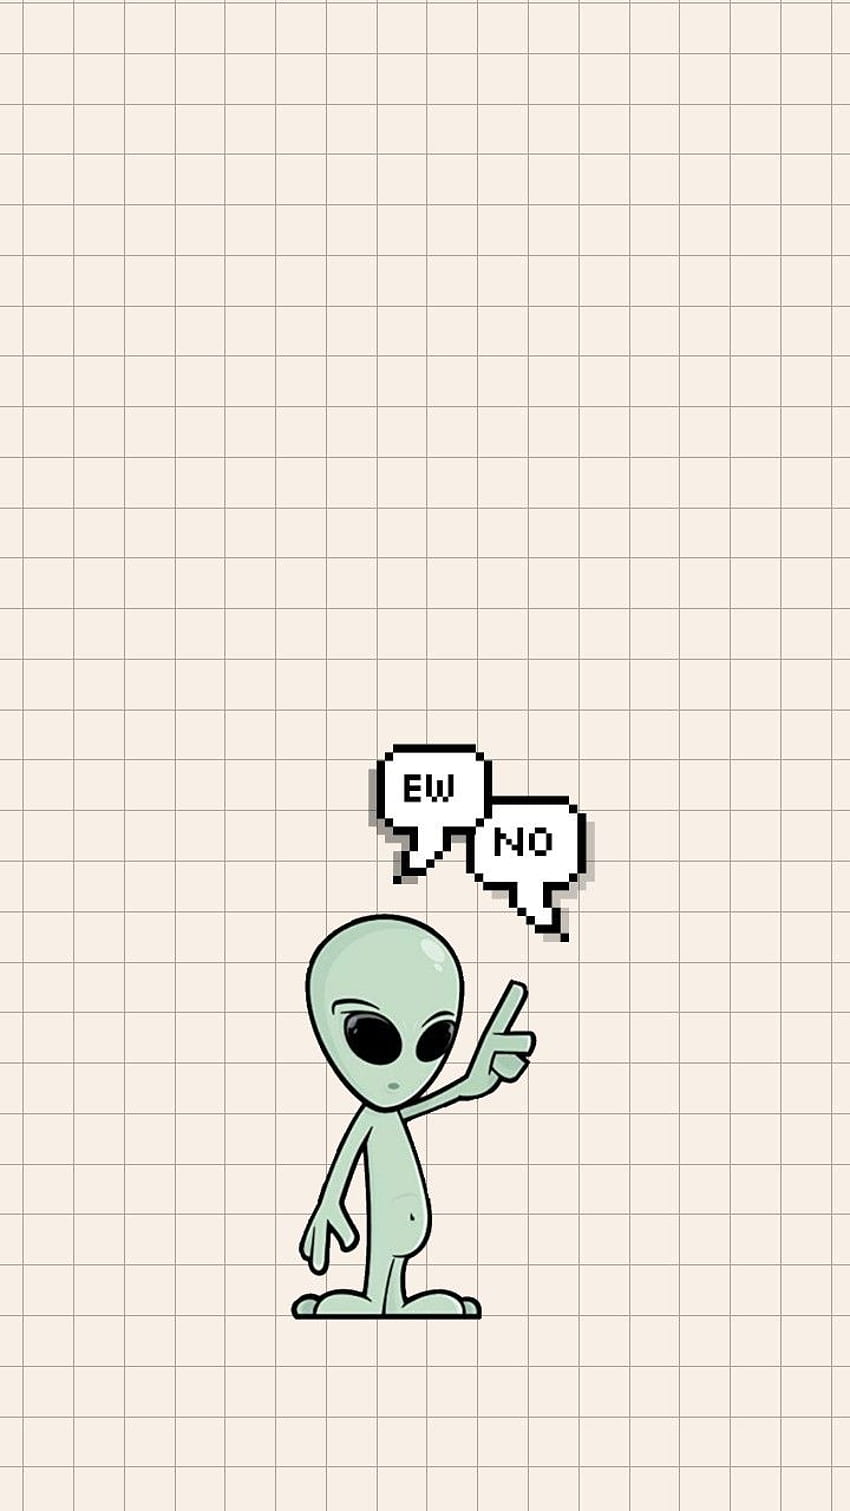 A cute and simple wallpaper of a green alien with black eyes and a speech bubble that says 